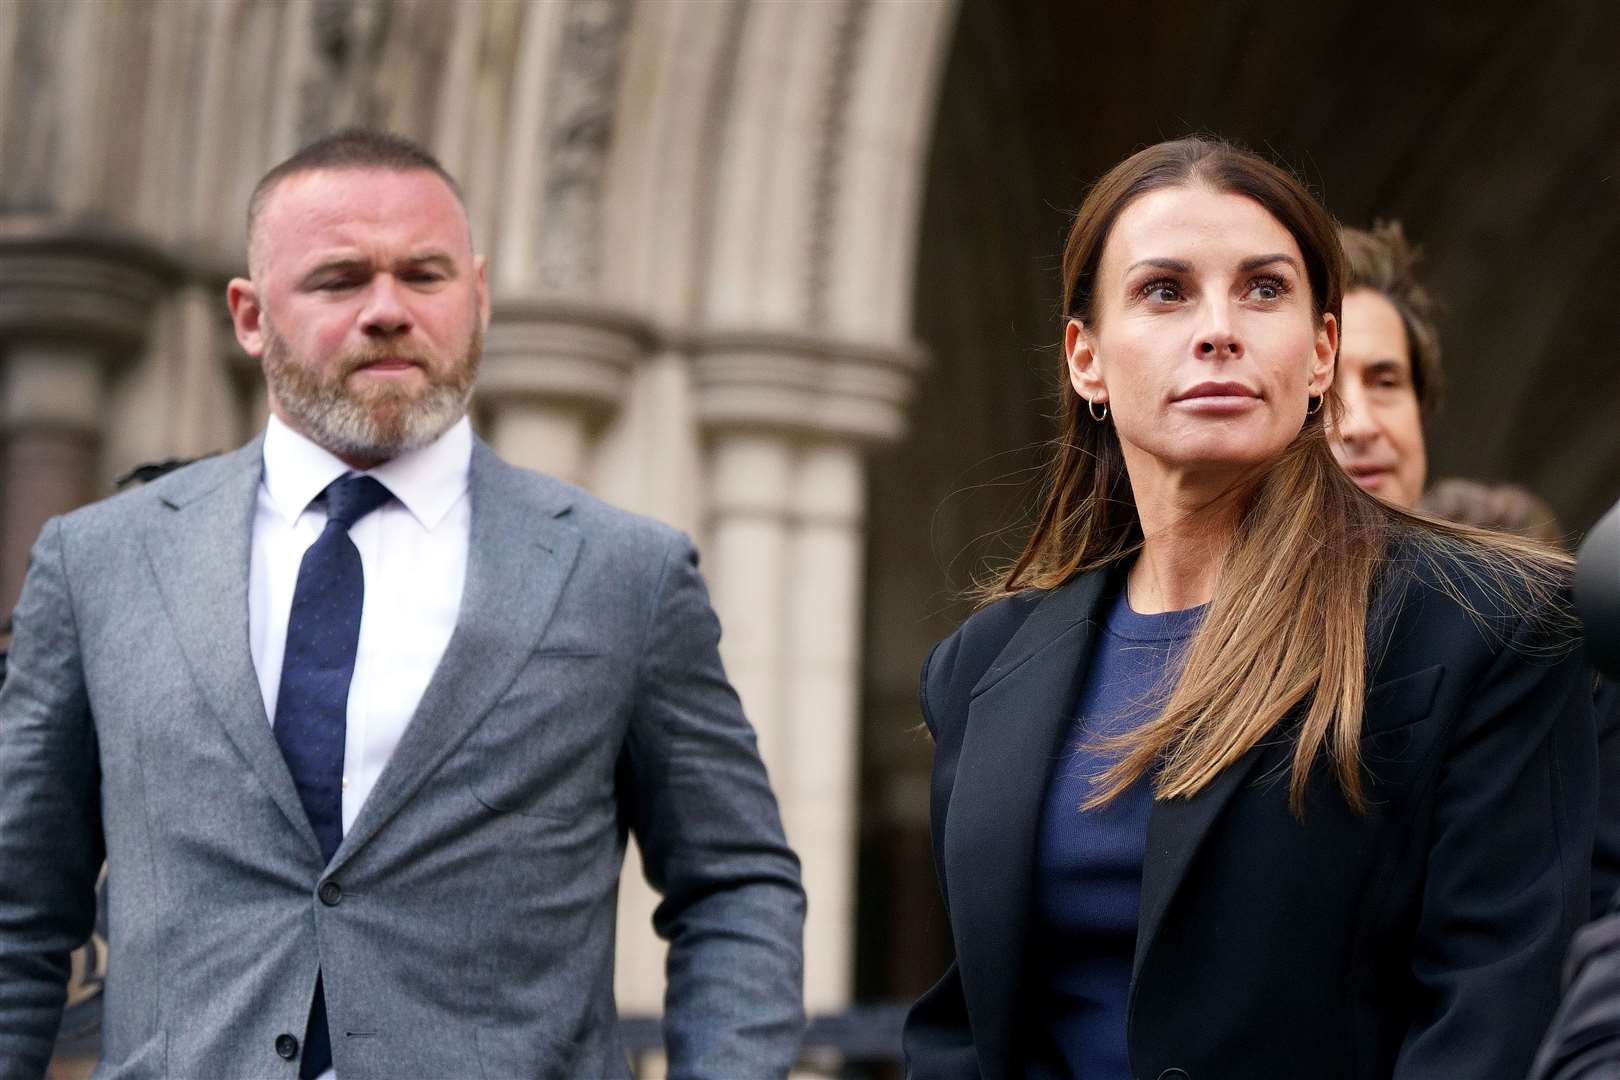 Wayne and Coleen Rooney will both give evidence later in the case (Victoria Jones/PA)